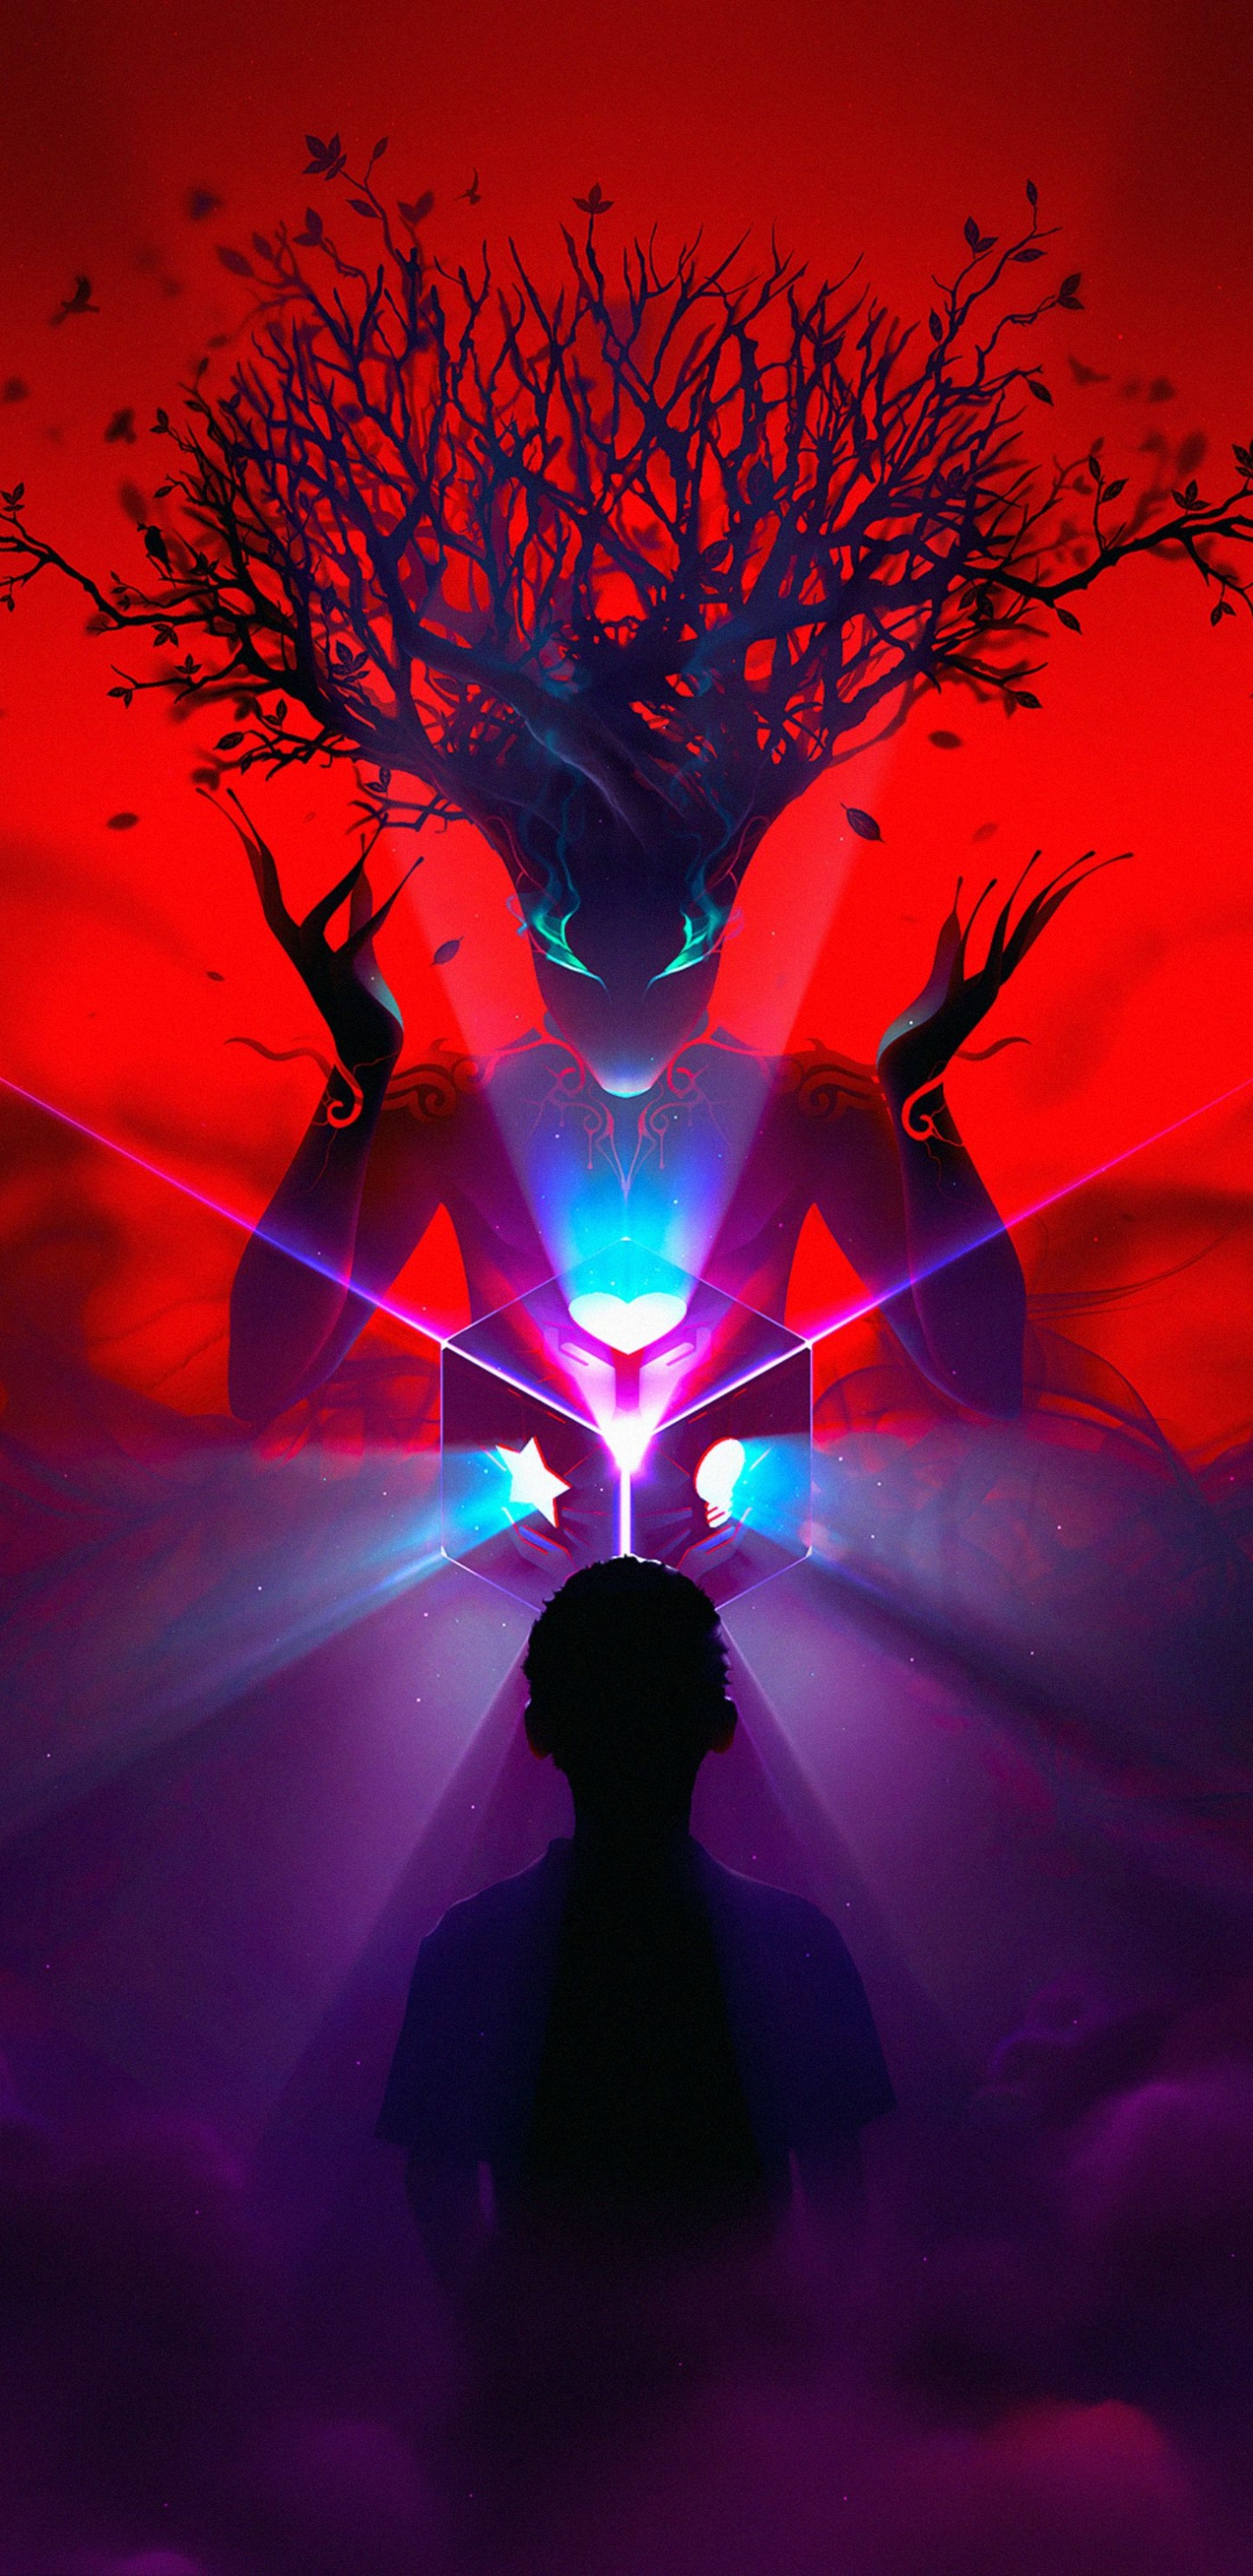 Silhouette of Man Standing Under Blue and Purple Lights. Wallpaper in 1440x2960 Resolution